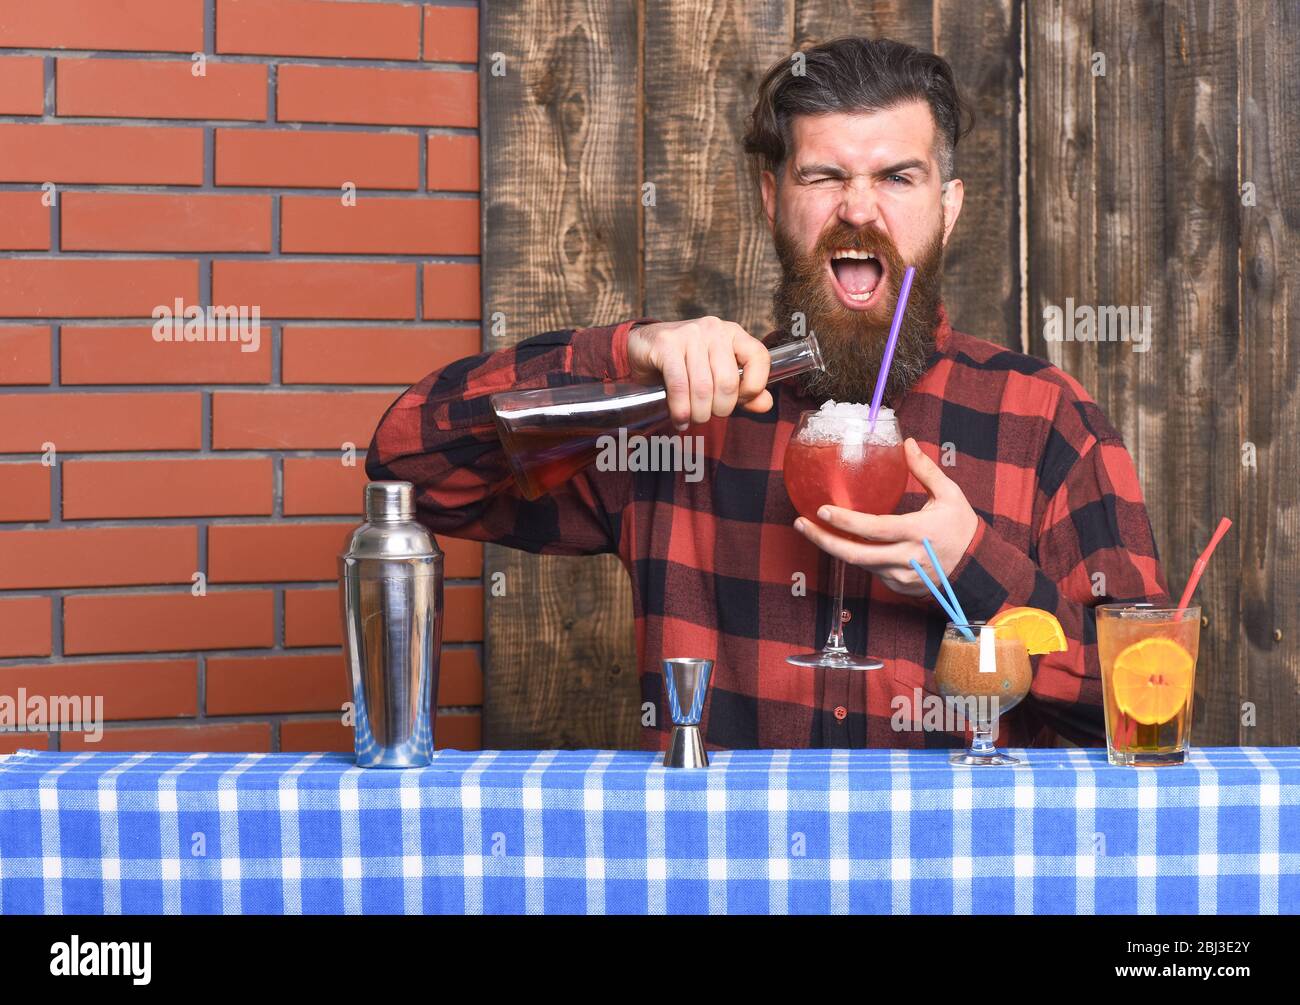 Barman with beard and shouting face makes cocktail, pouring glass with alcohol. Barman or hipster mixing drink. Man holds wineglass and bottle on wooden texture background. Making drinks concept. Stock Photo